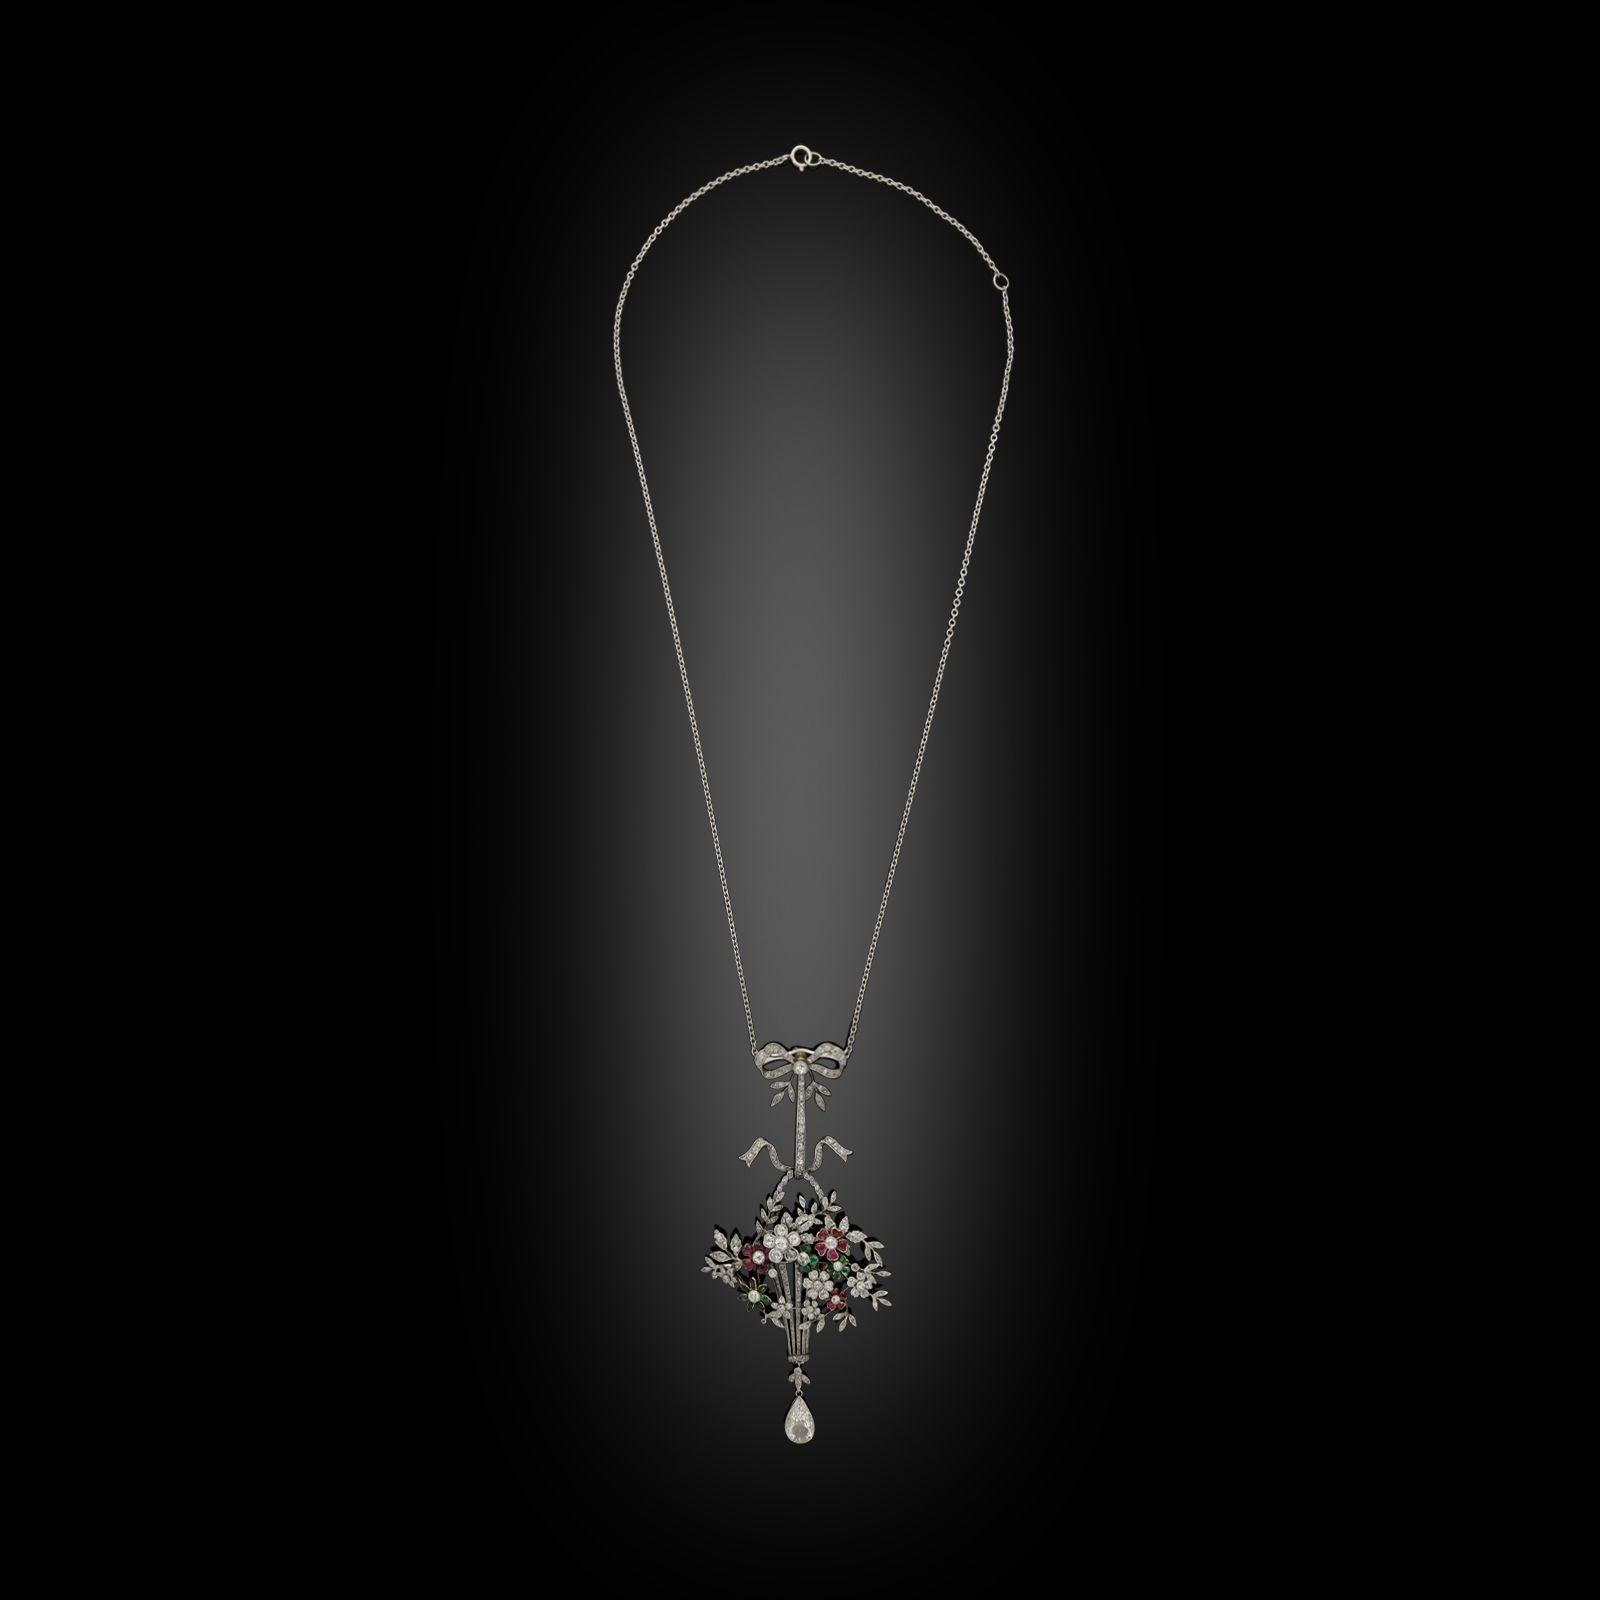 A beautiful platinum and multi-gem set giardinetto pendant c.1910, the pendant designed as a long tapering openwork basket with rope twist handle finely crafted in platinum and set throughout with old-cut diamonds, filled with a generous bouquet of